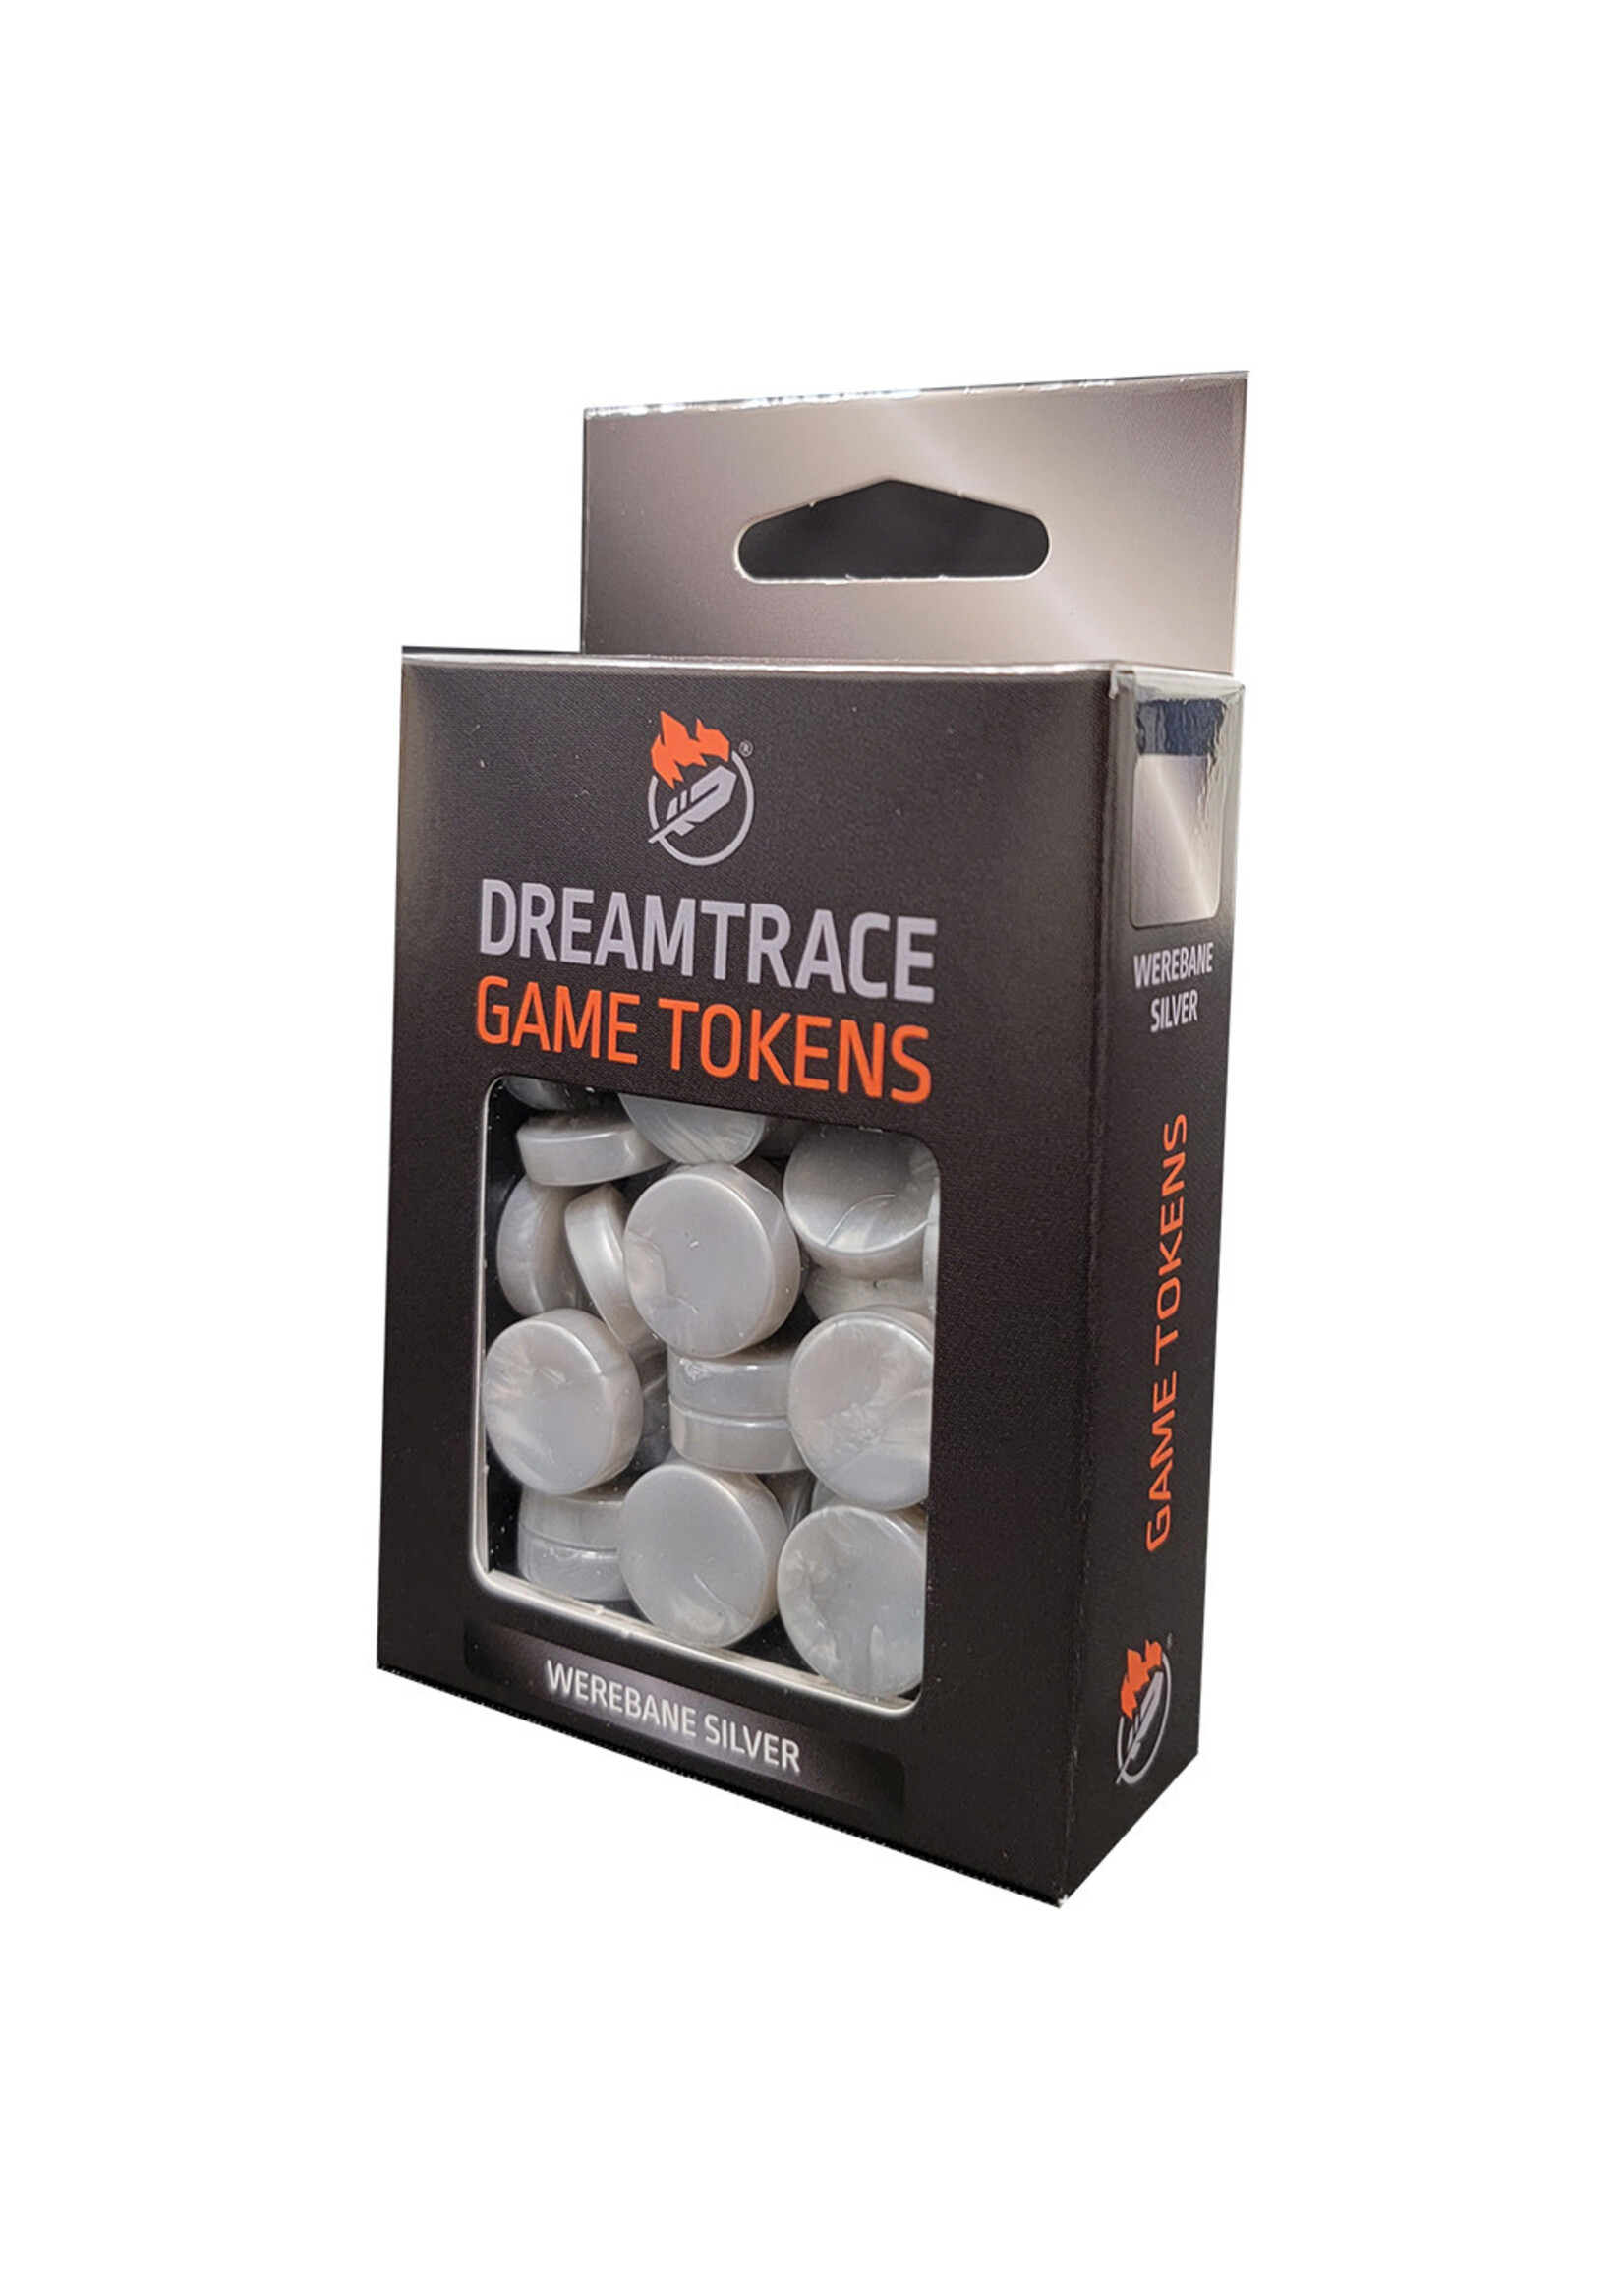 Ghost Galaxy DreamTrace Gaming Tokens: Werebane Silver